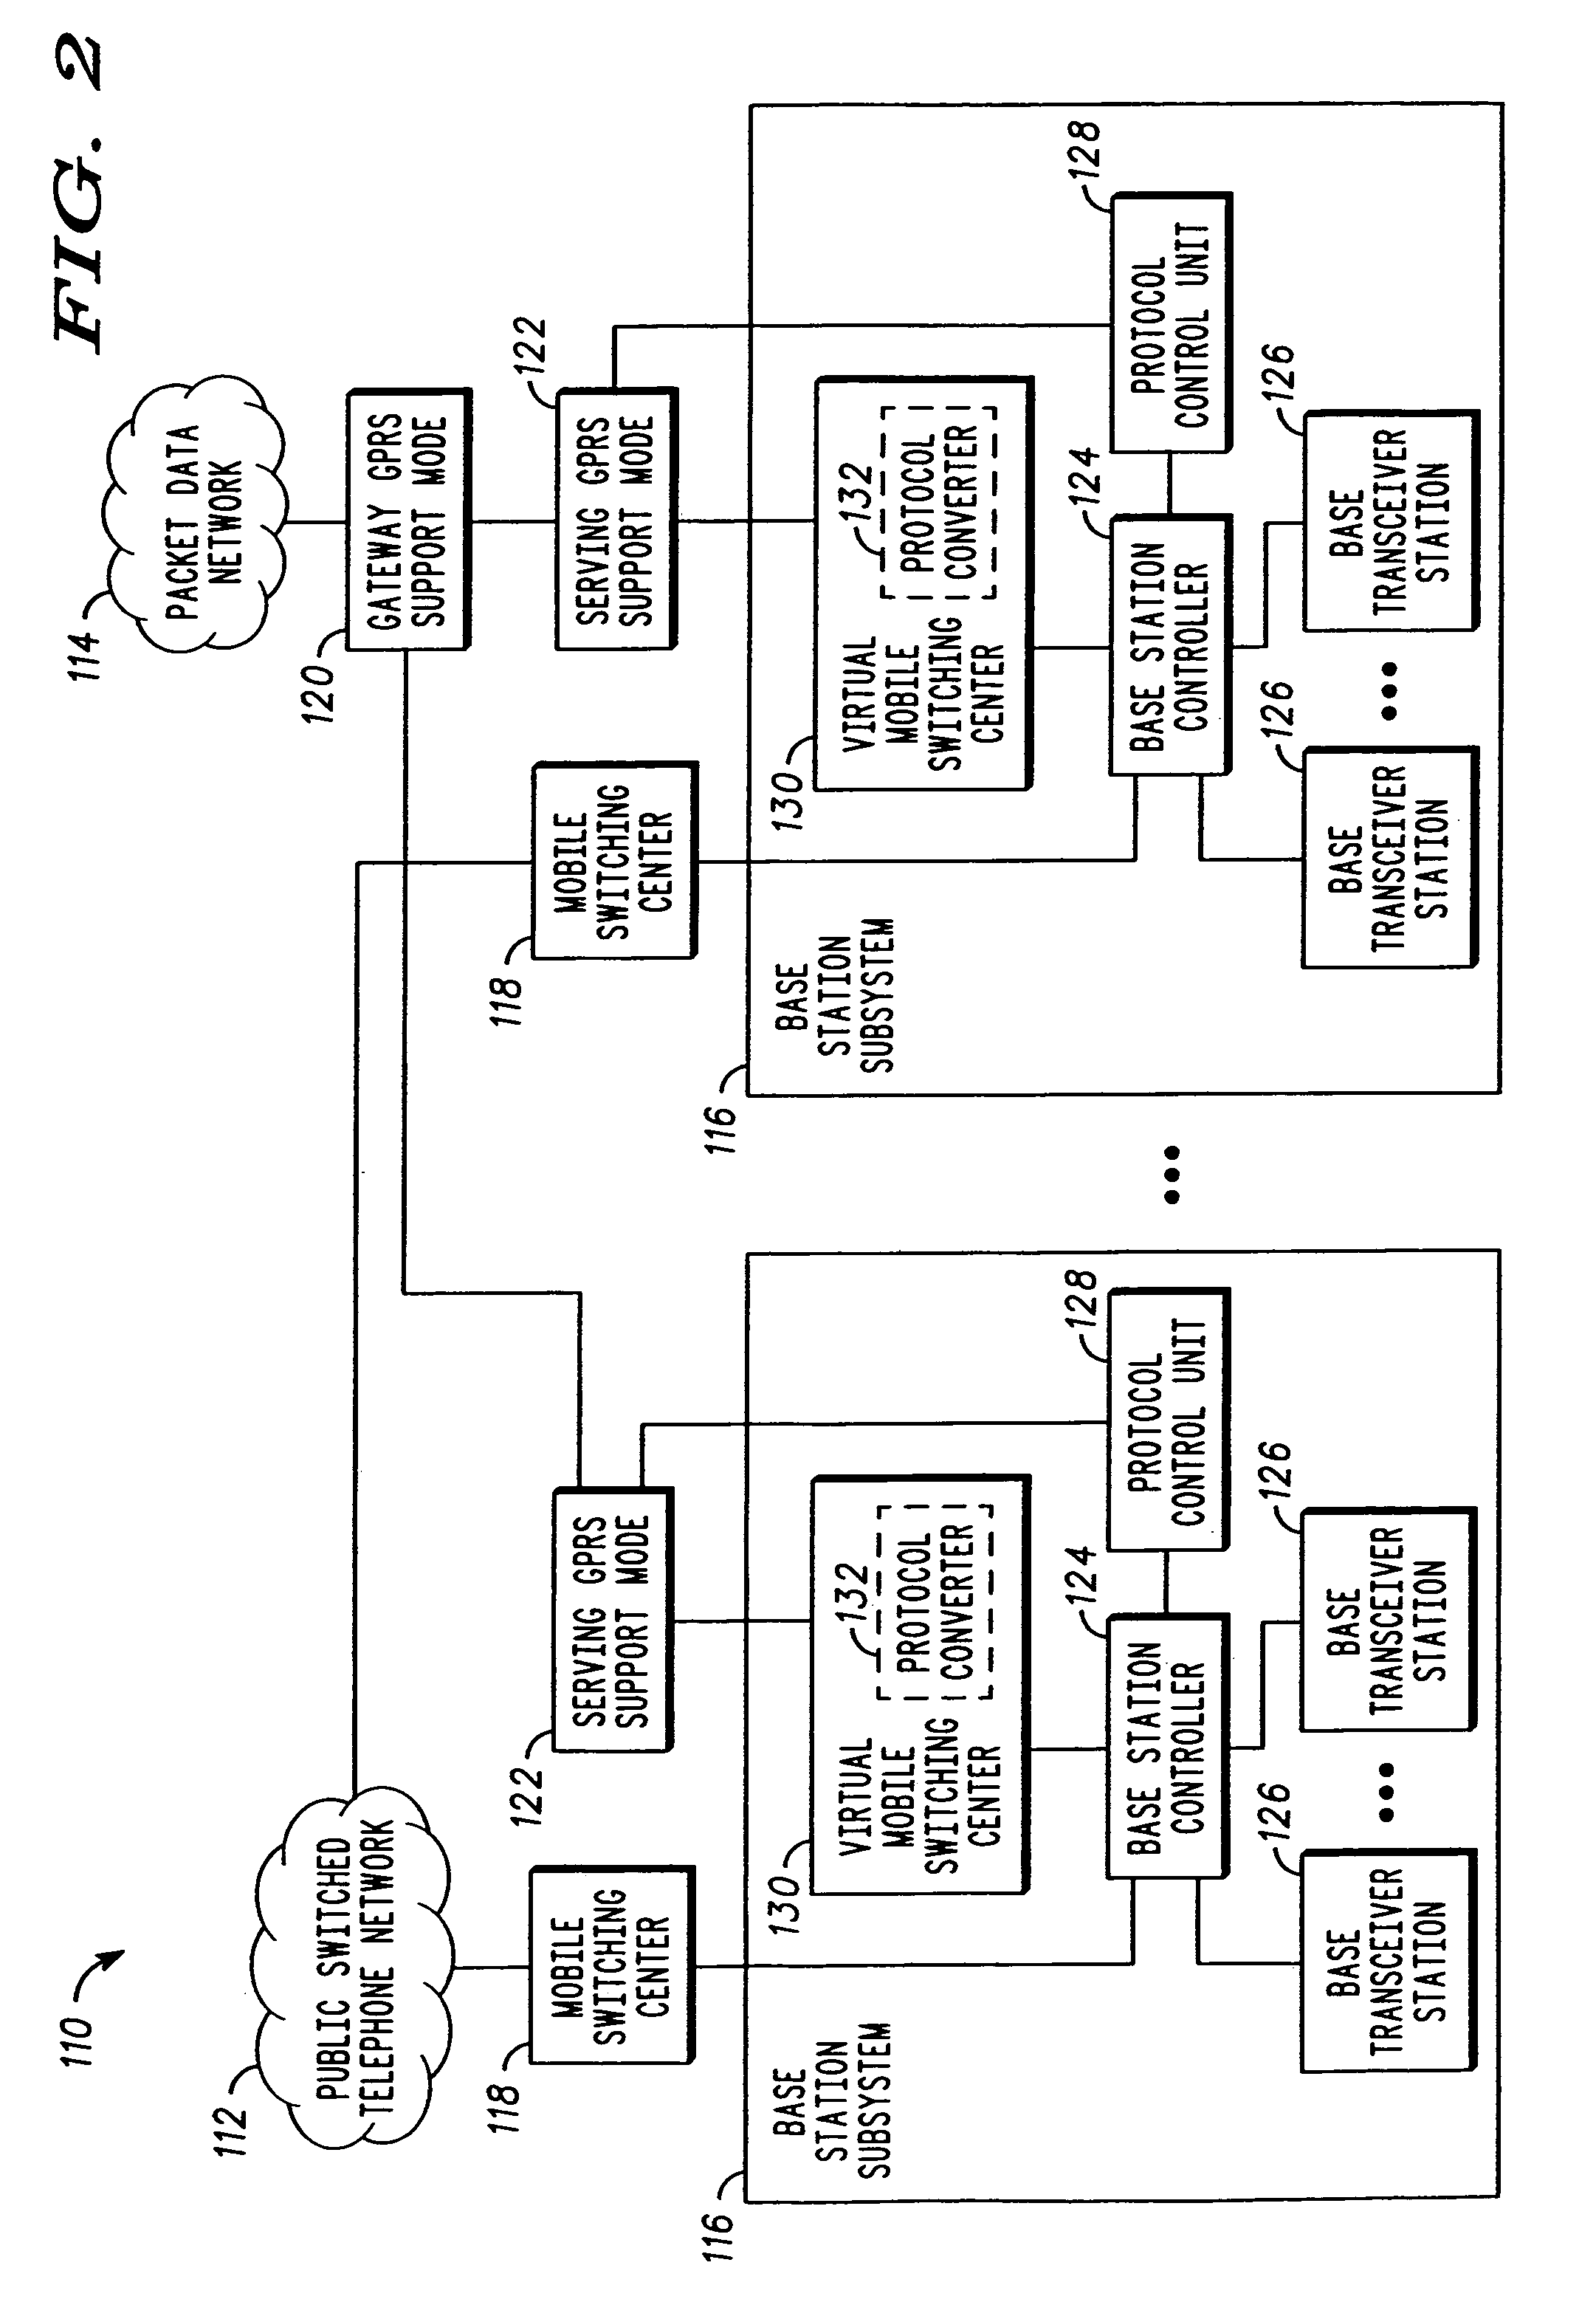 Communication controller and method for maintaining a communication connection during a cell reselection